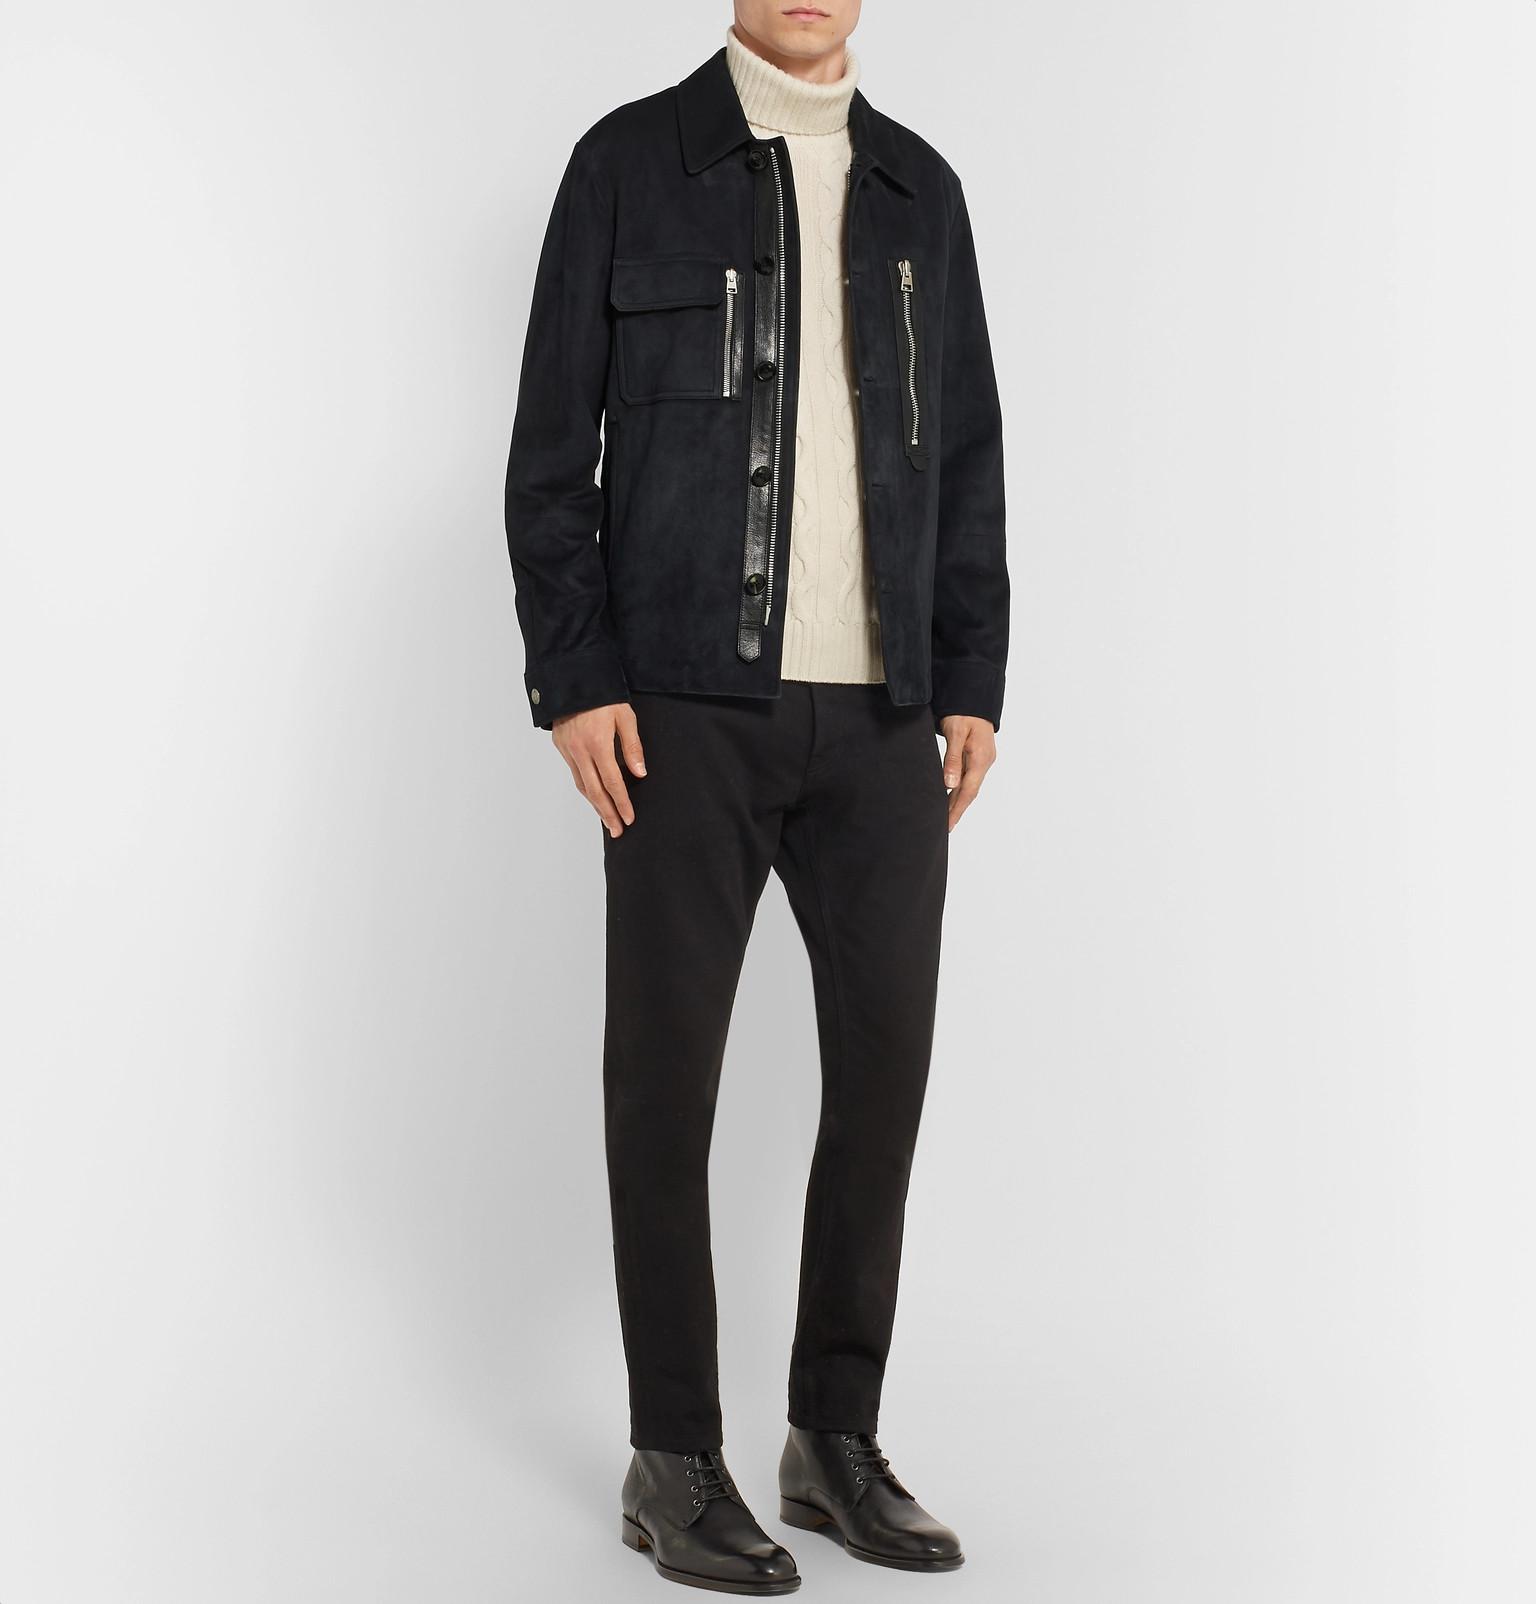 Tom Ford Leather-trimmed Suede Jacket in Navy (Blue) for Men - Lyst